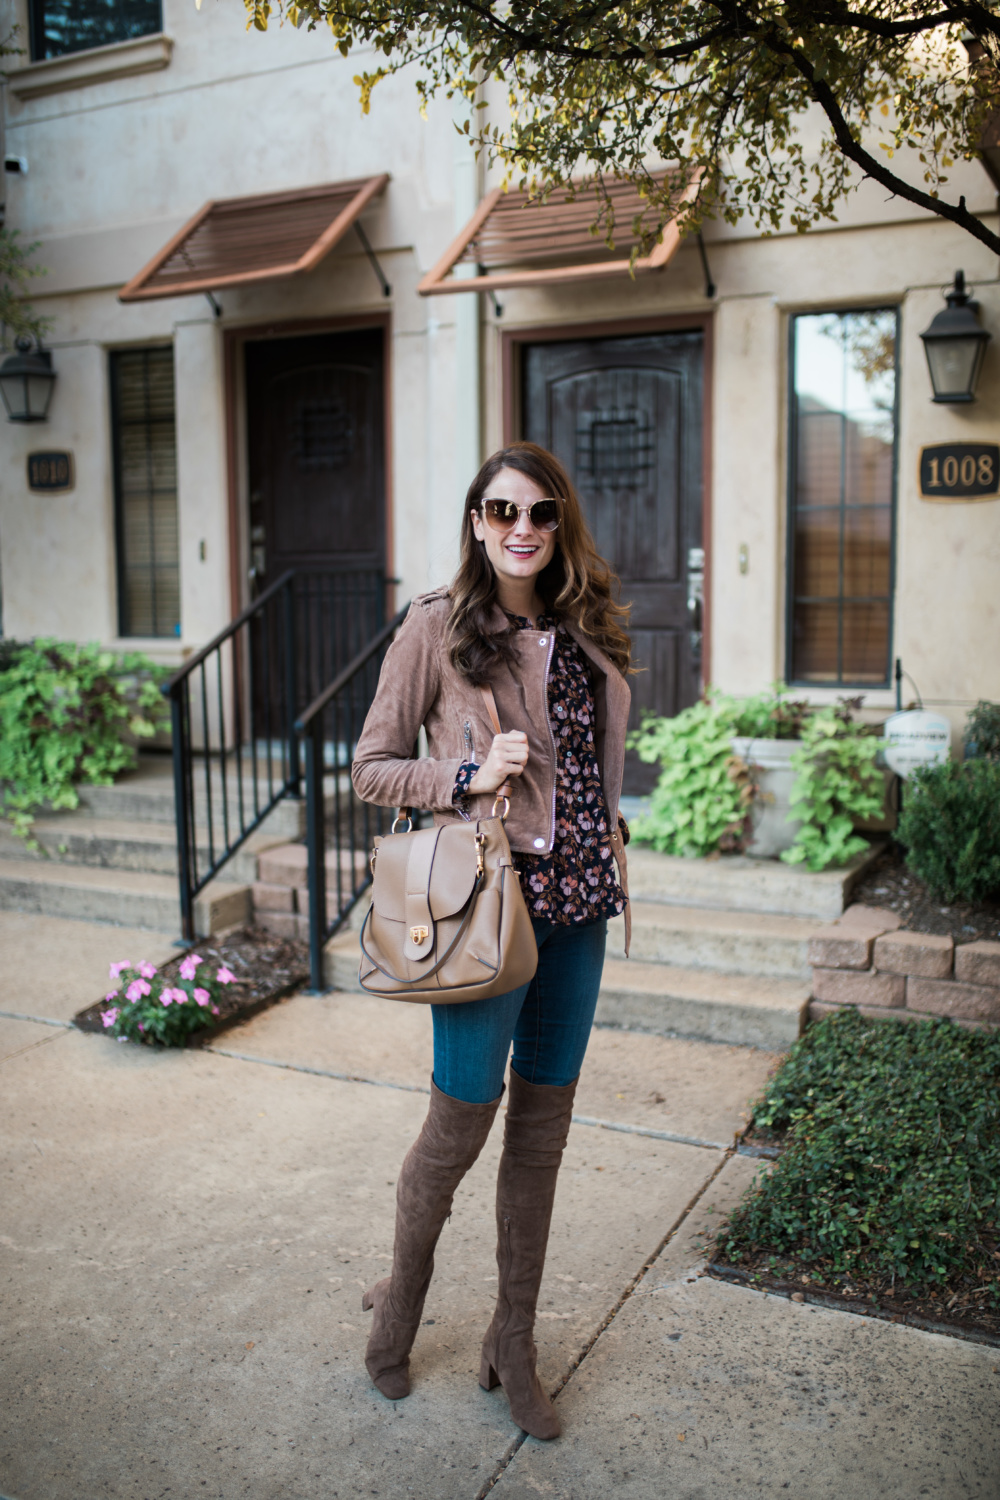 How to wear over the knee or tall boots if you are petite and if you are tall, featuring fashion bloggers Erin Busbee of Busbee Style and Amanda Miller of The Miller Affect